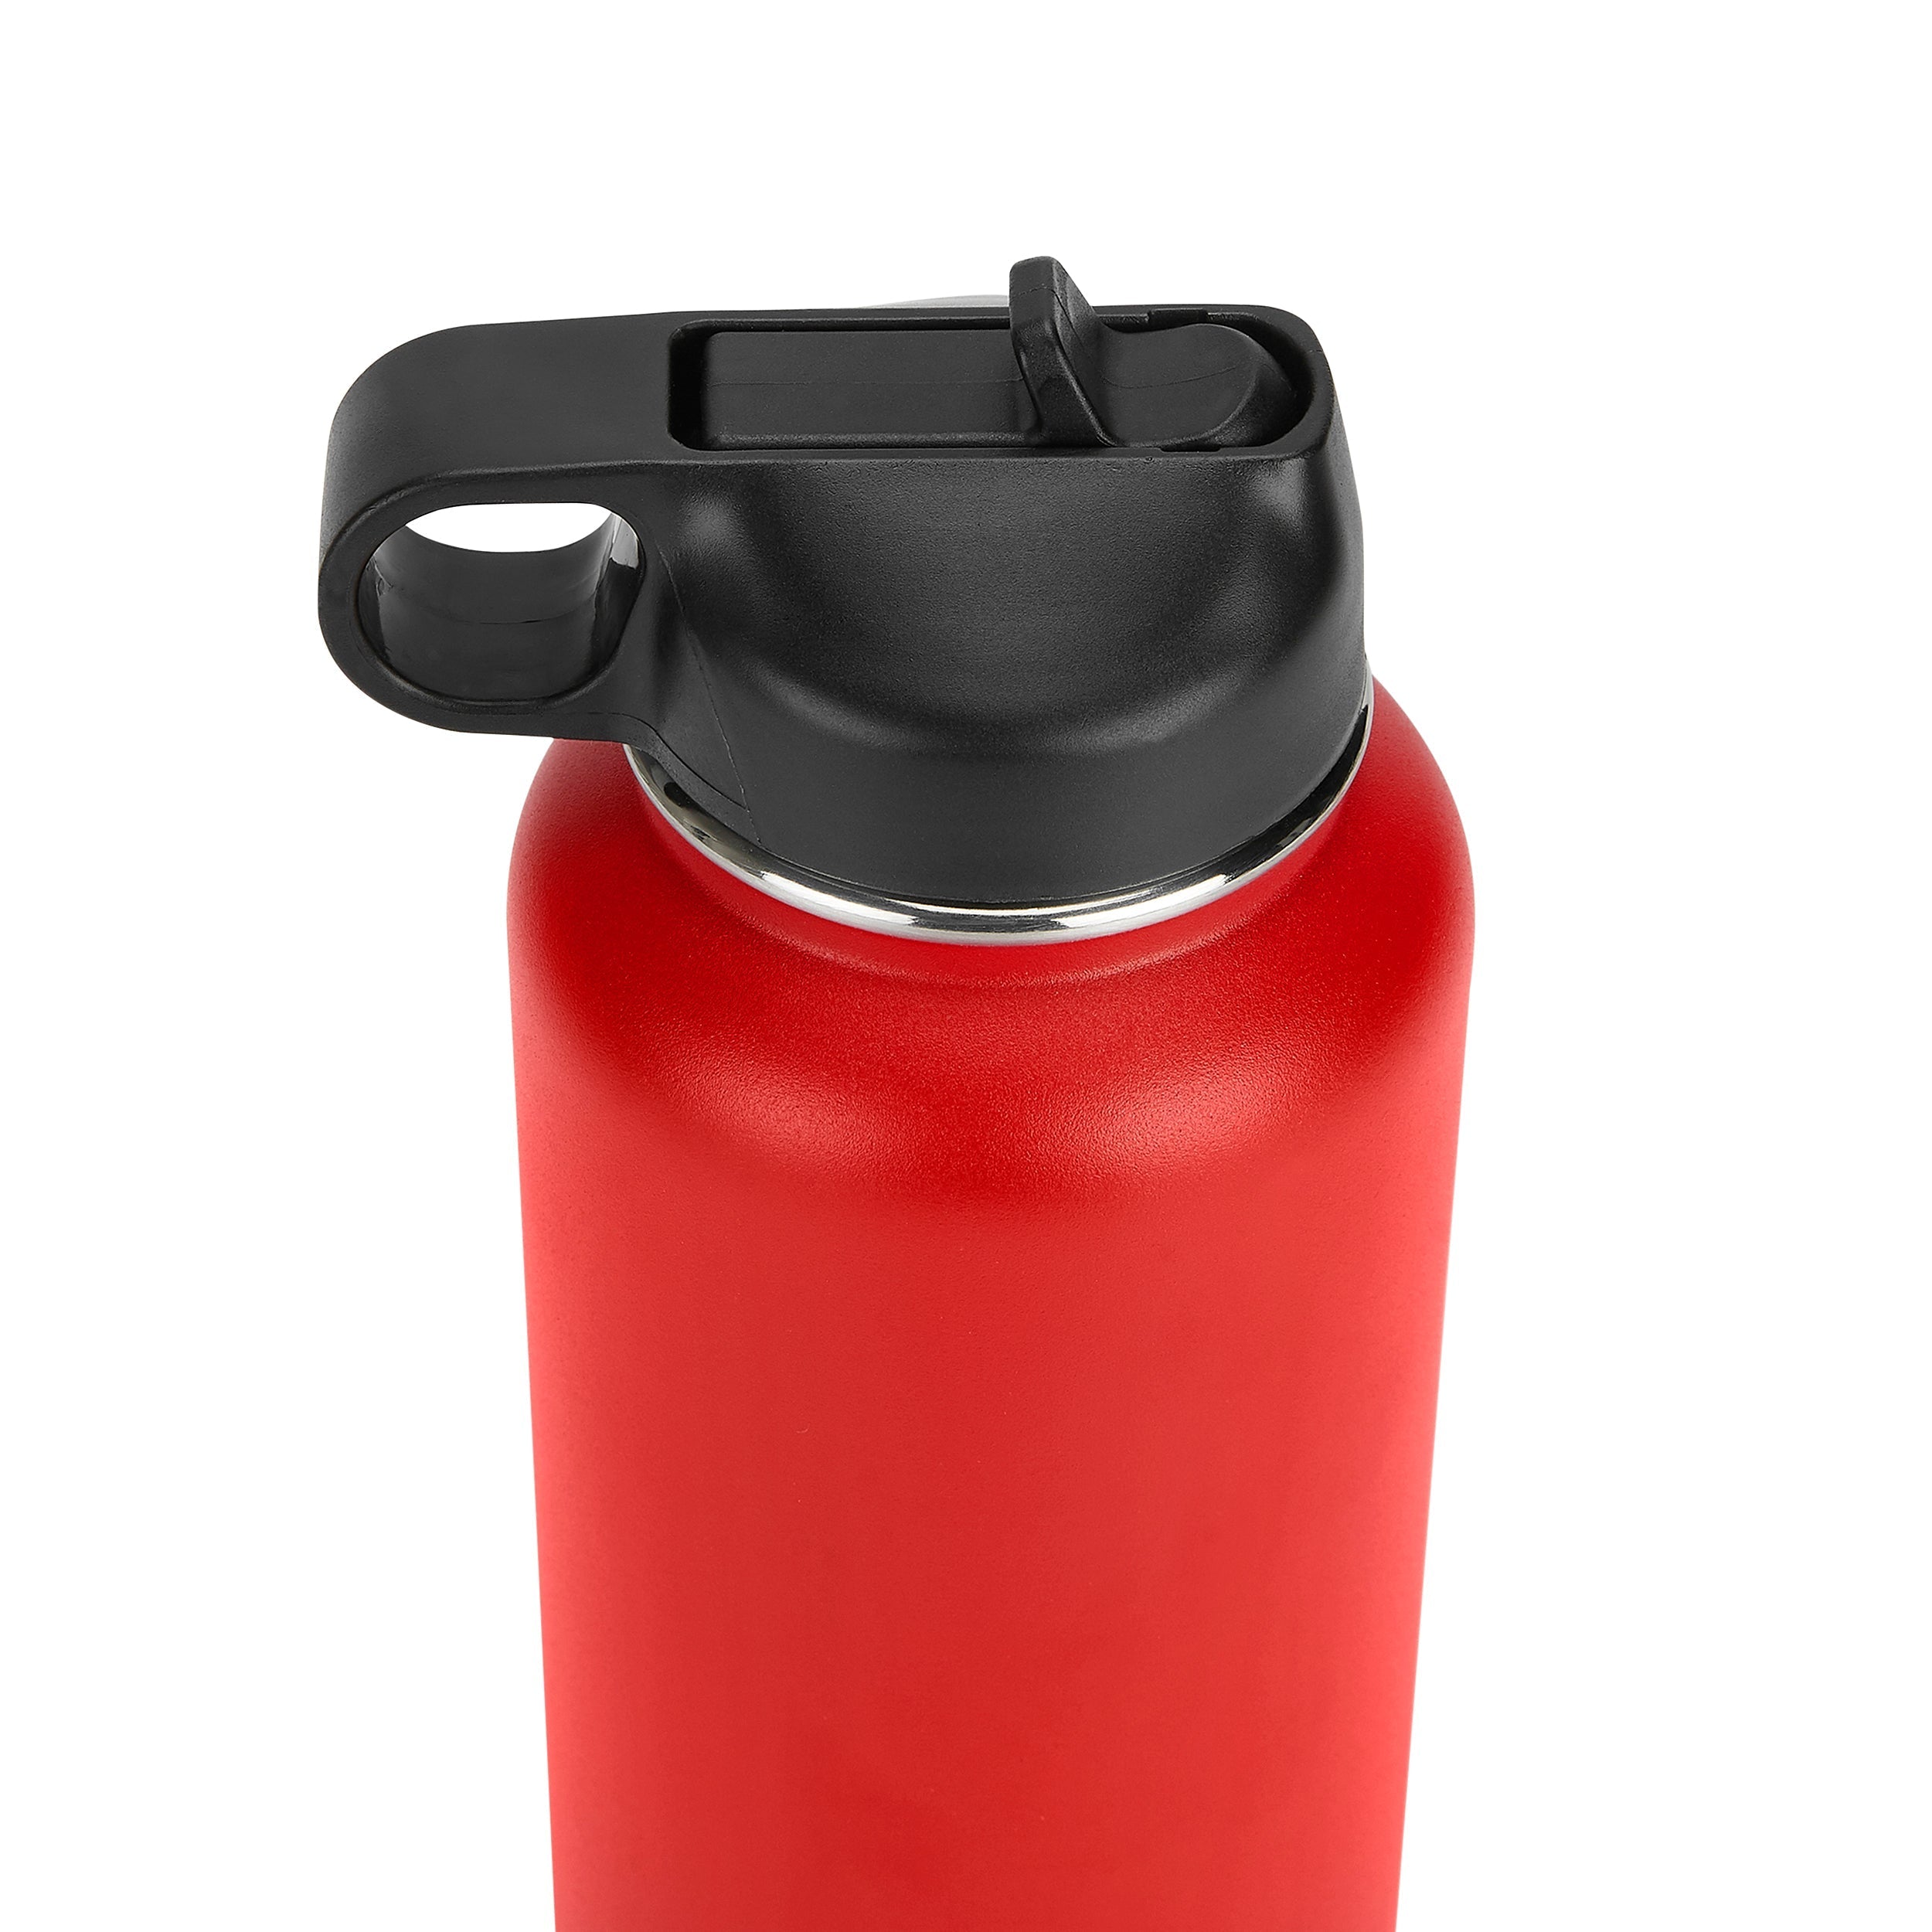 32oz Hydro Water Bottle for Camping